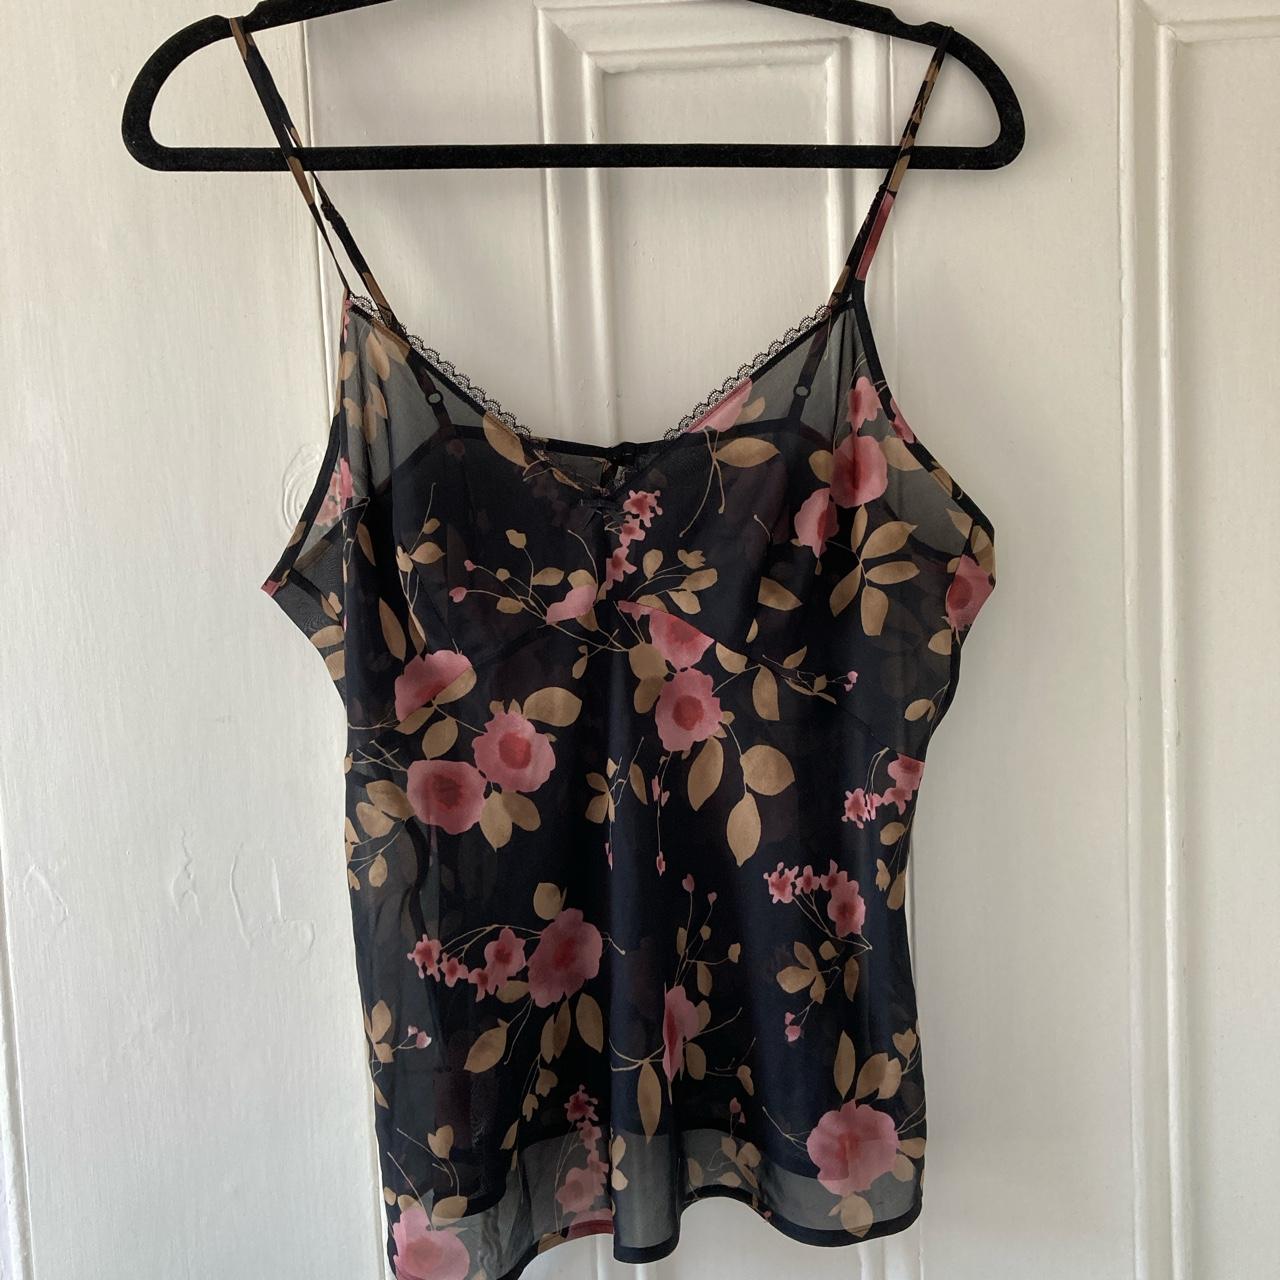 Sheer retro floral cami. Flattering with... - Depop